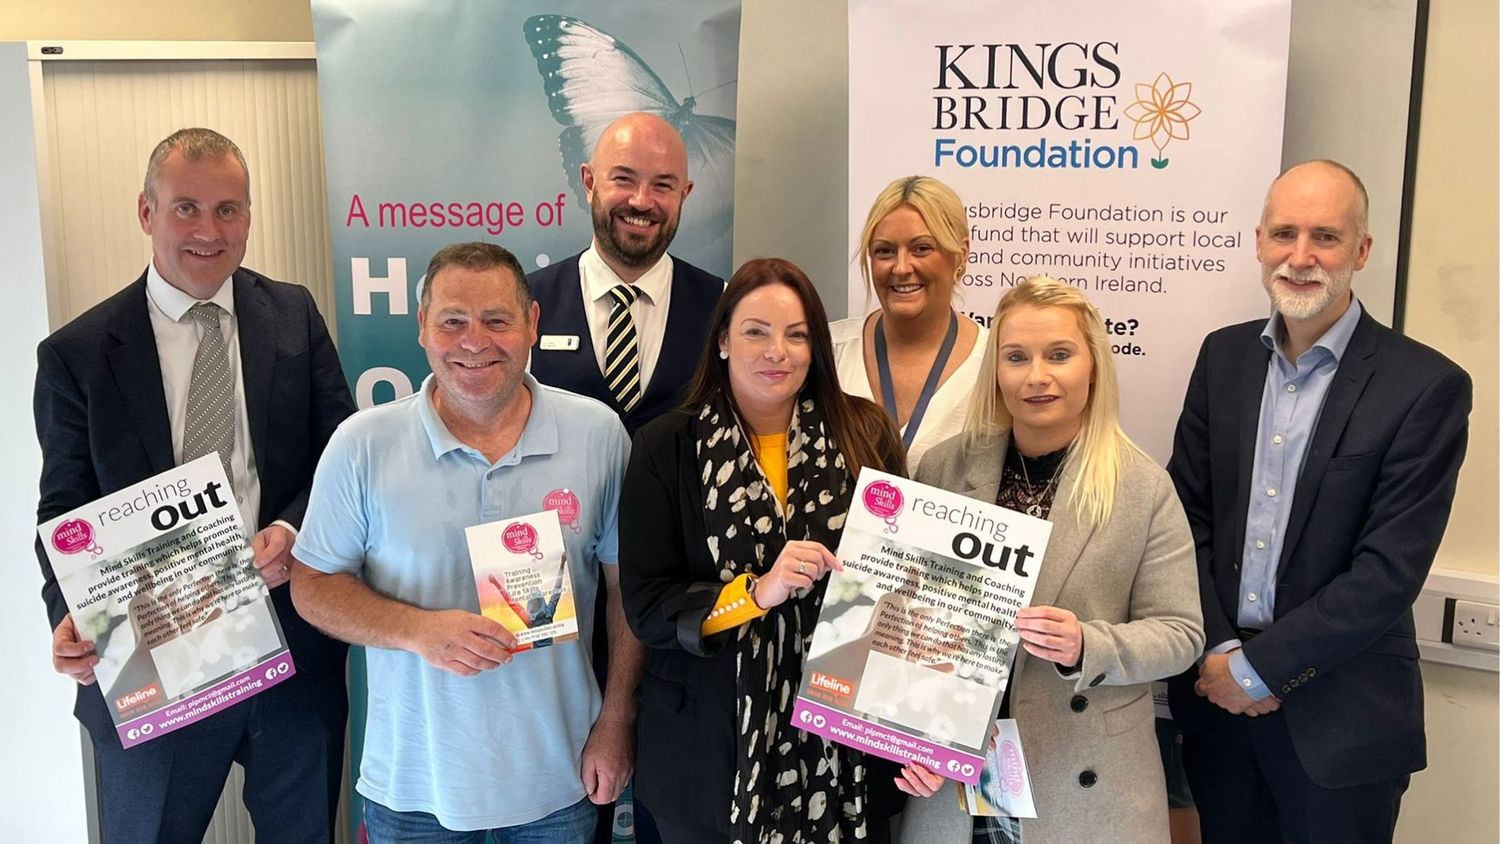 Kingsbridge Foundation awards £29,000 to support mental wellbeing